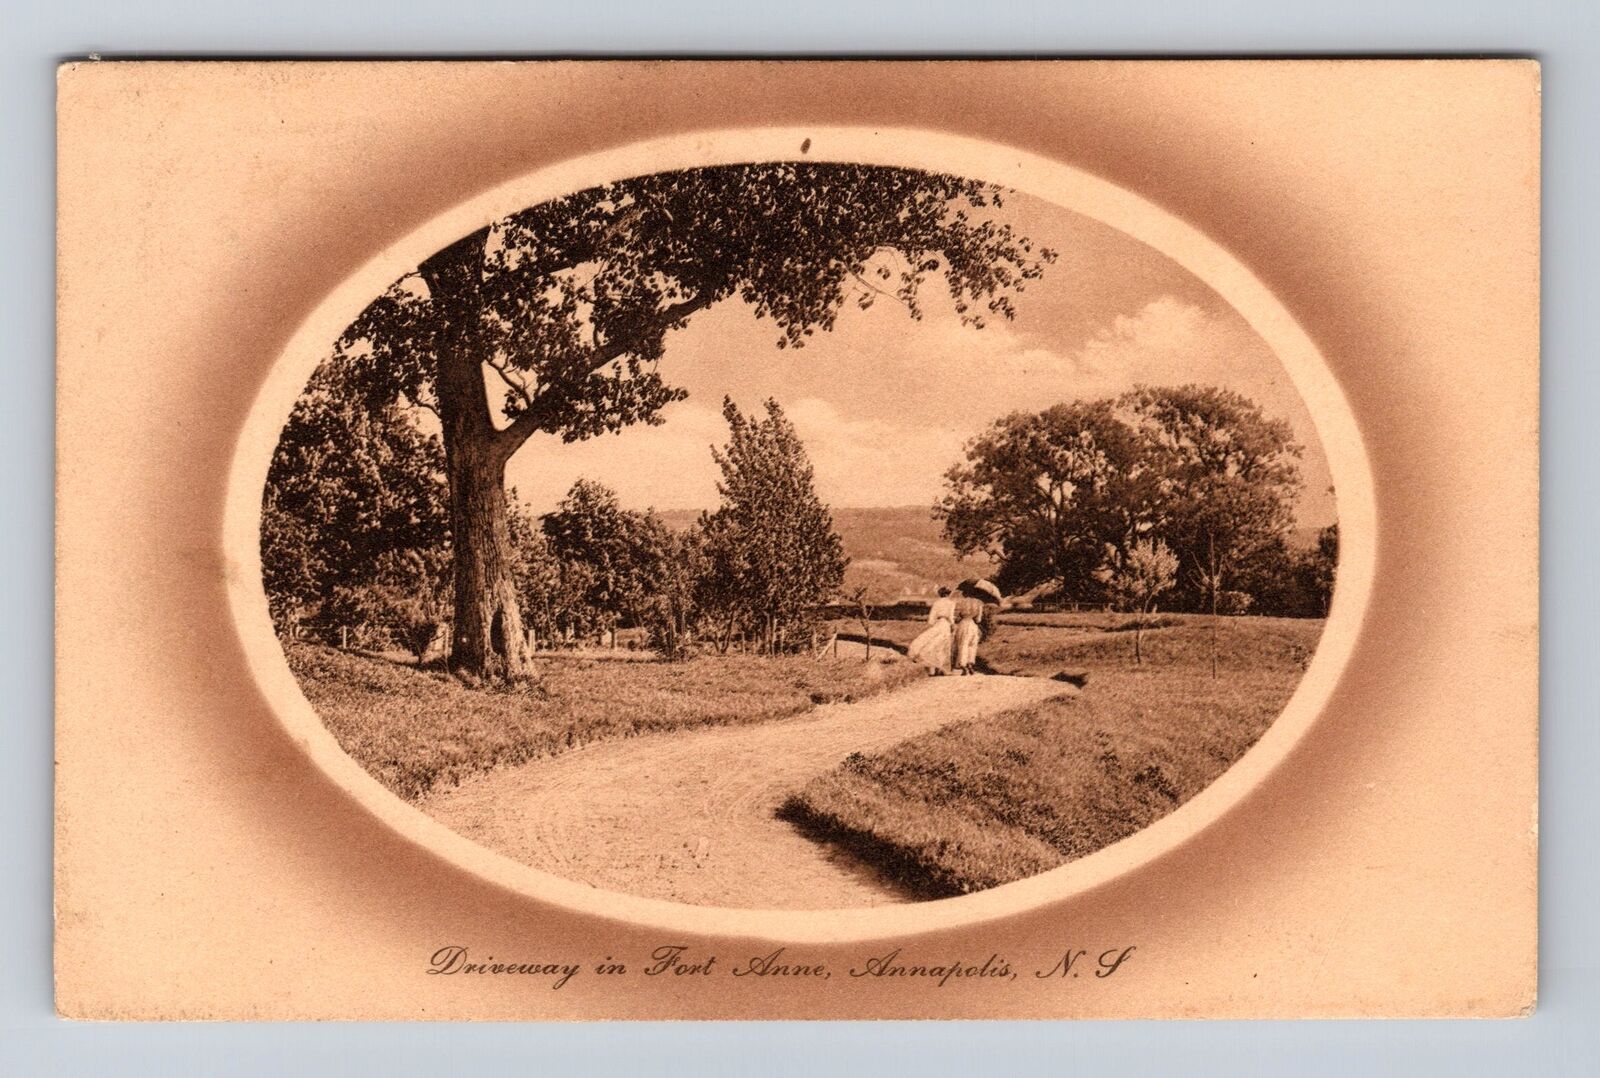 Annapolis NY-New York, Driveway In Fort Anne, Antique, Vintage Postcard